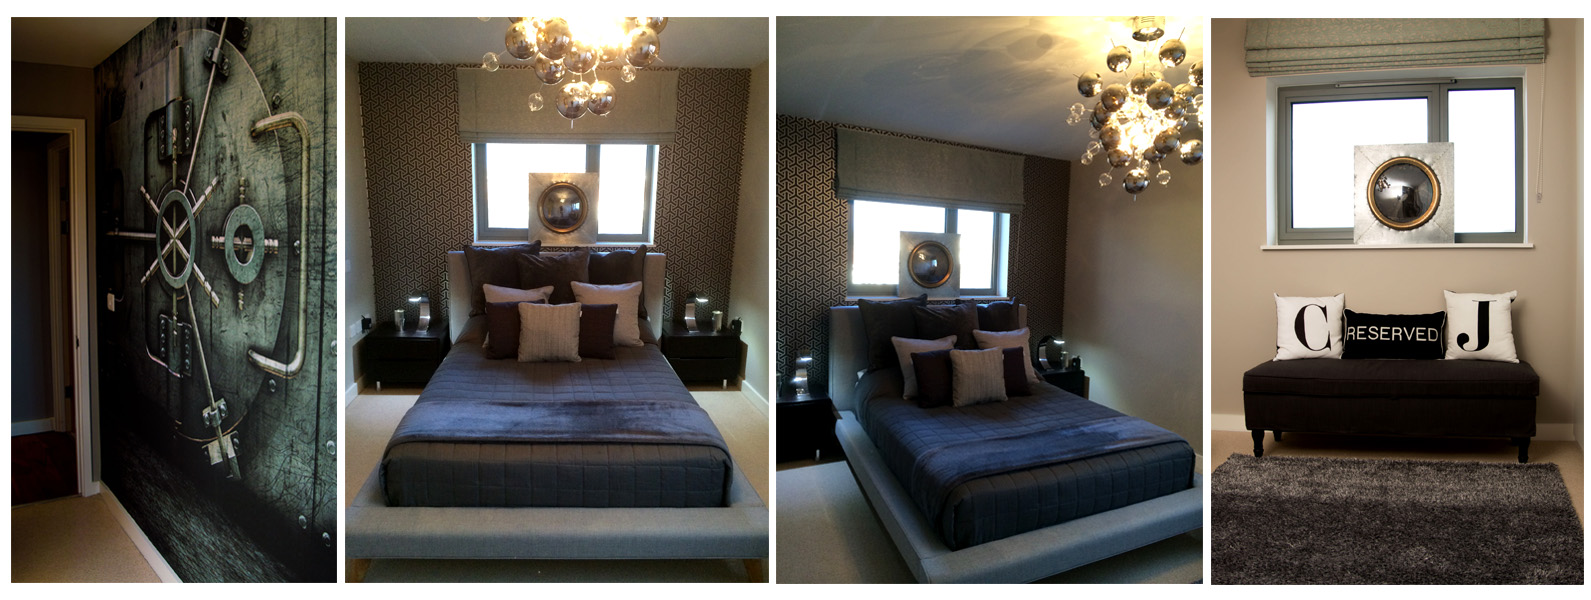 Master bedroom interior design and styling details by Moji Salehi at Moji Interiors in Hove.